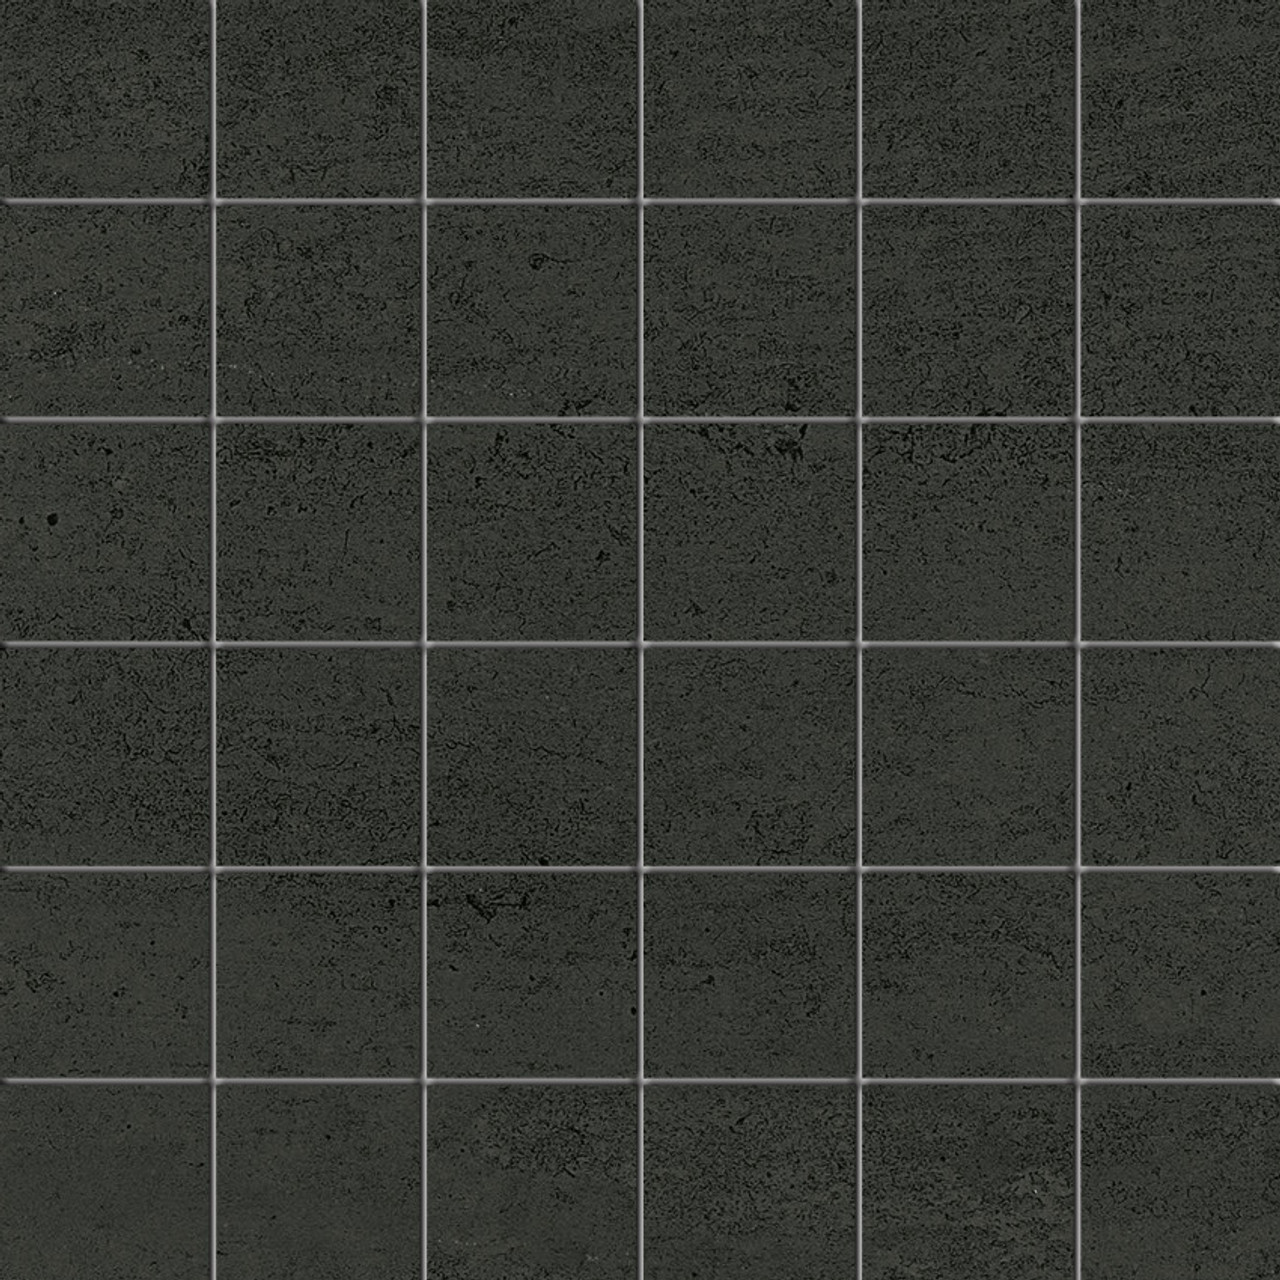 Tile in Abstract Black White